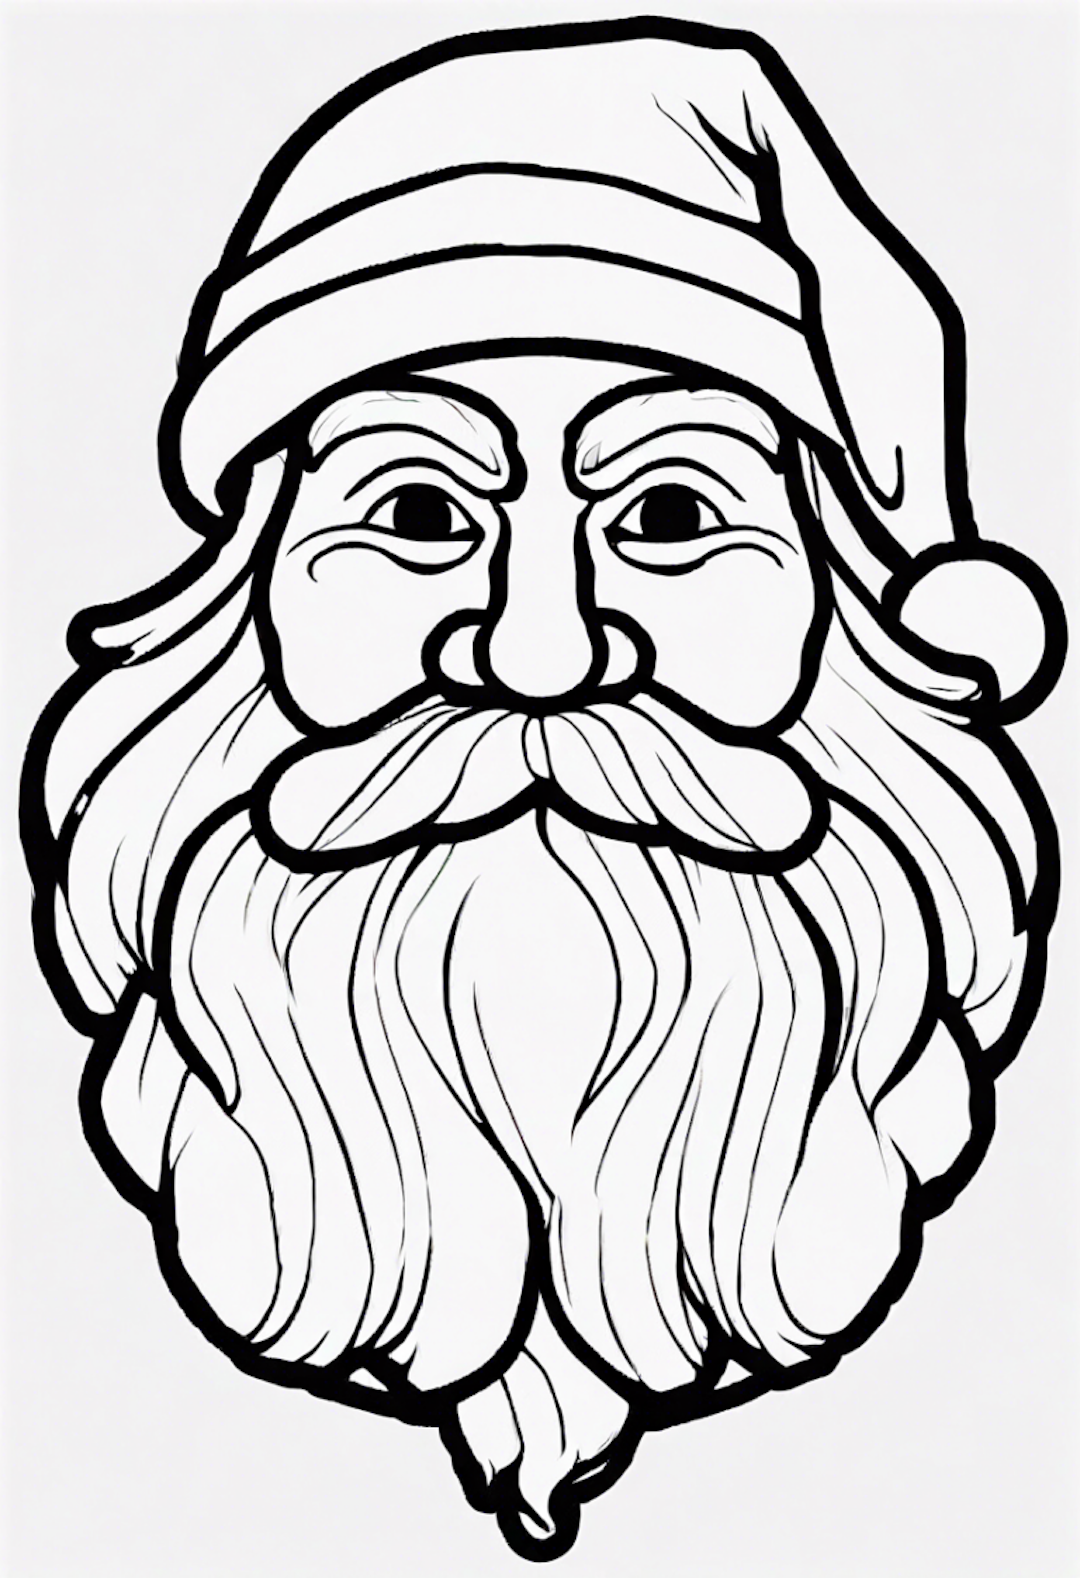 Santa Claus Coloring Page coloring pages